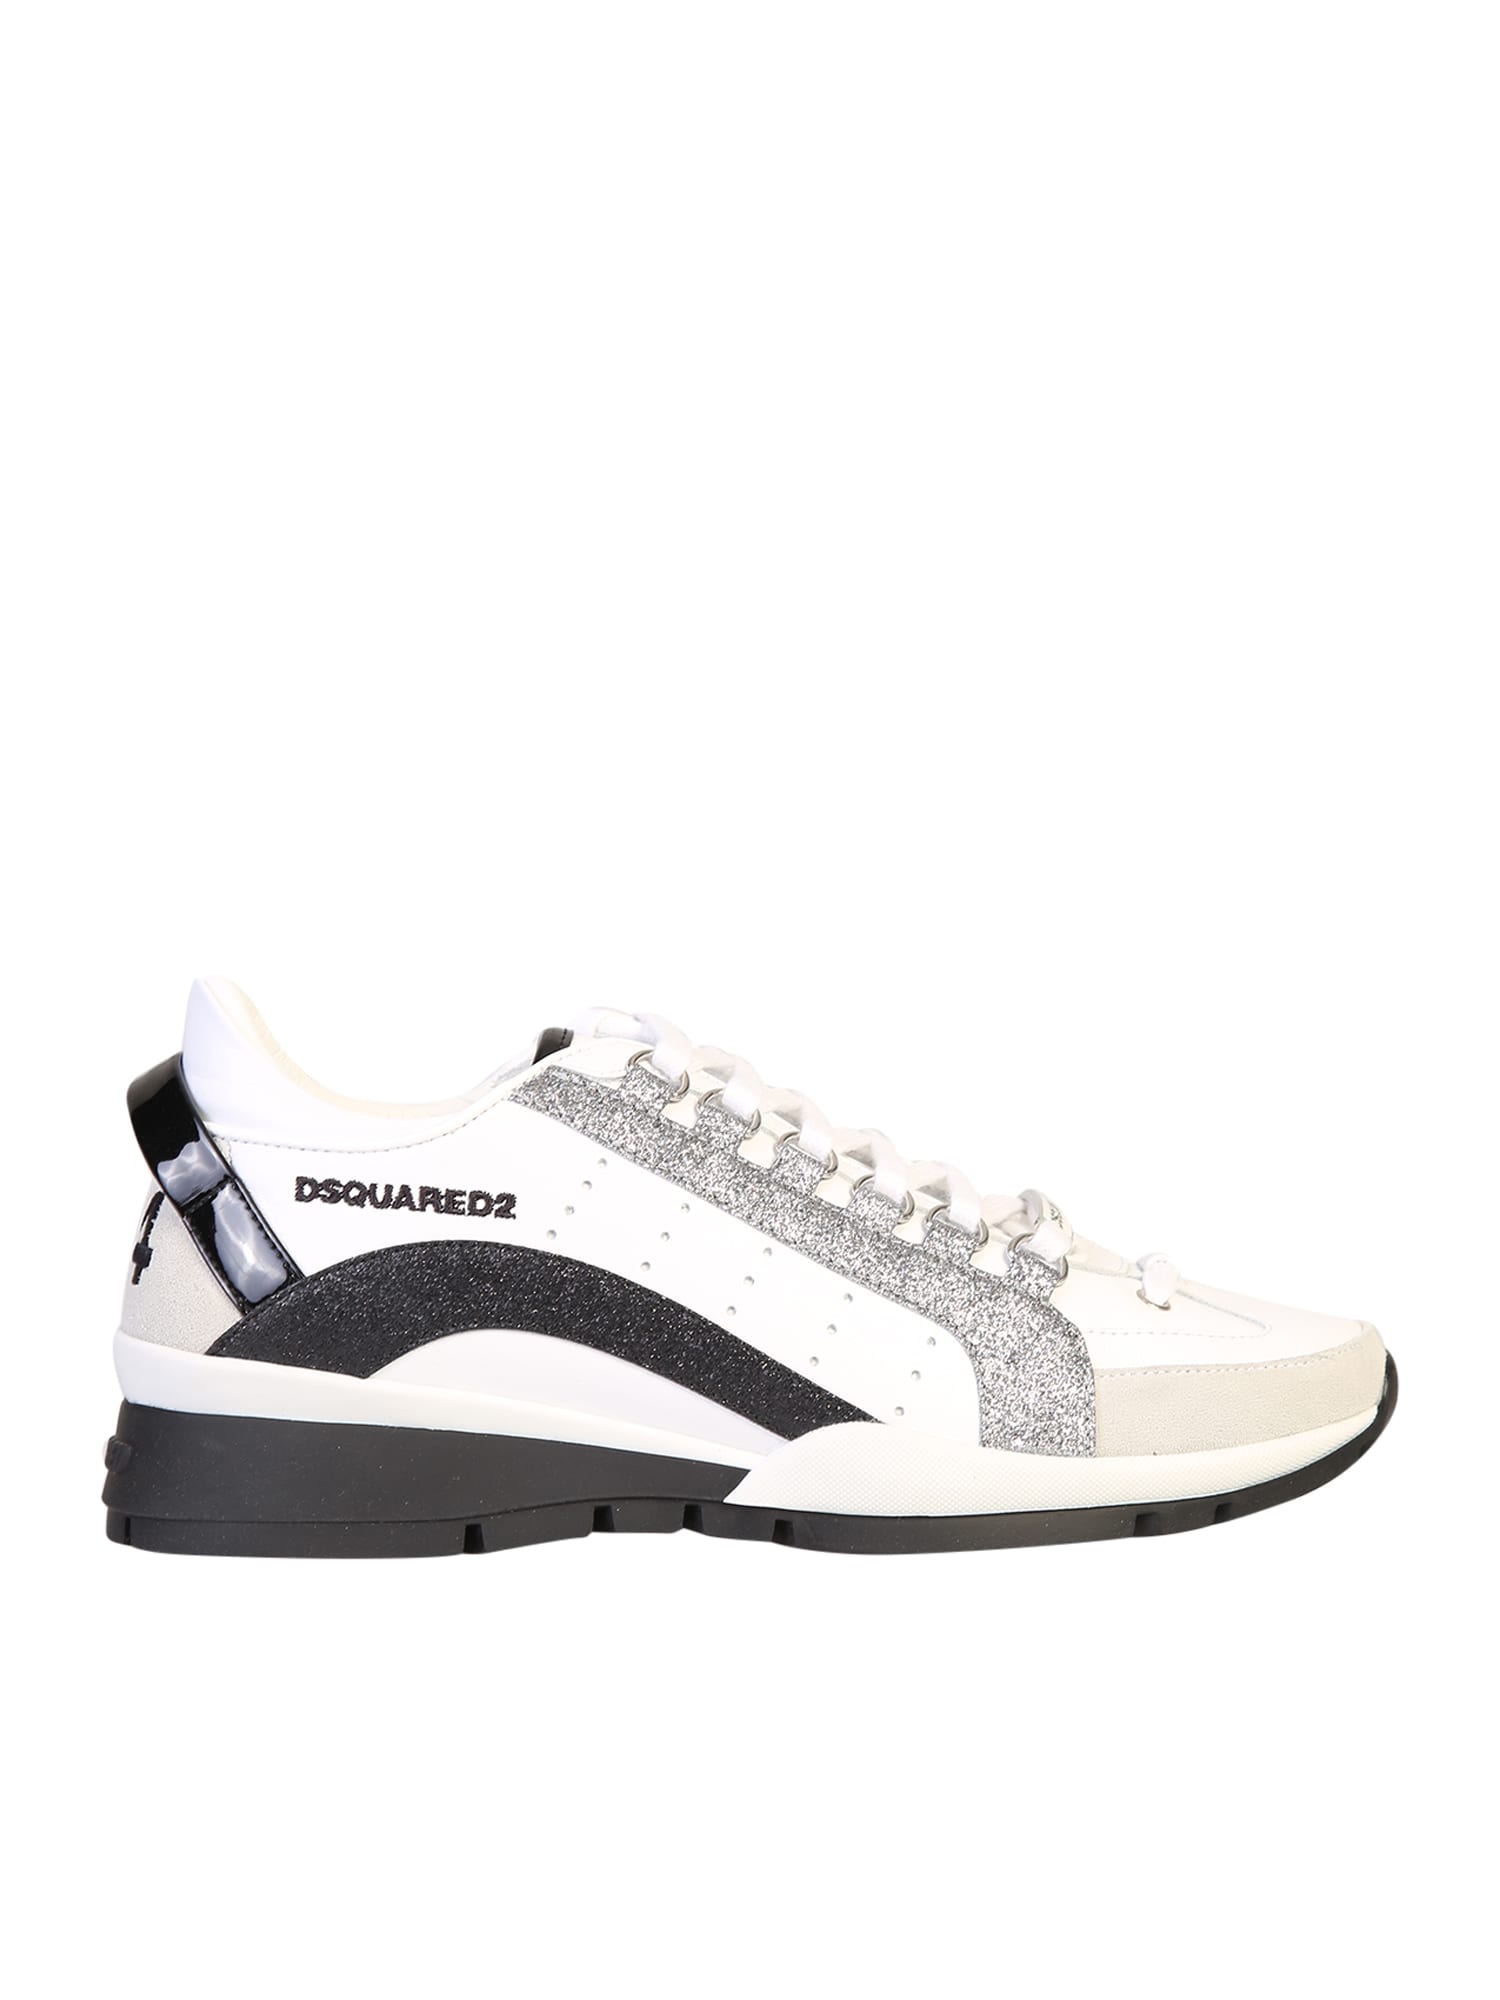 Branded Sneakers Dsquared2